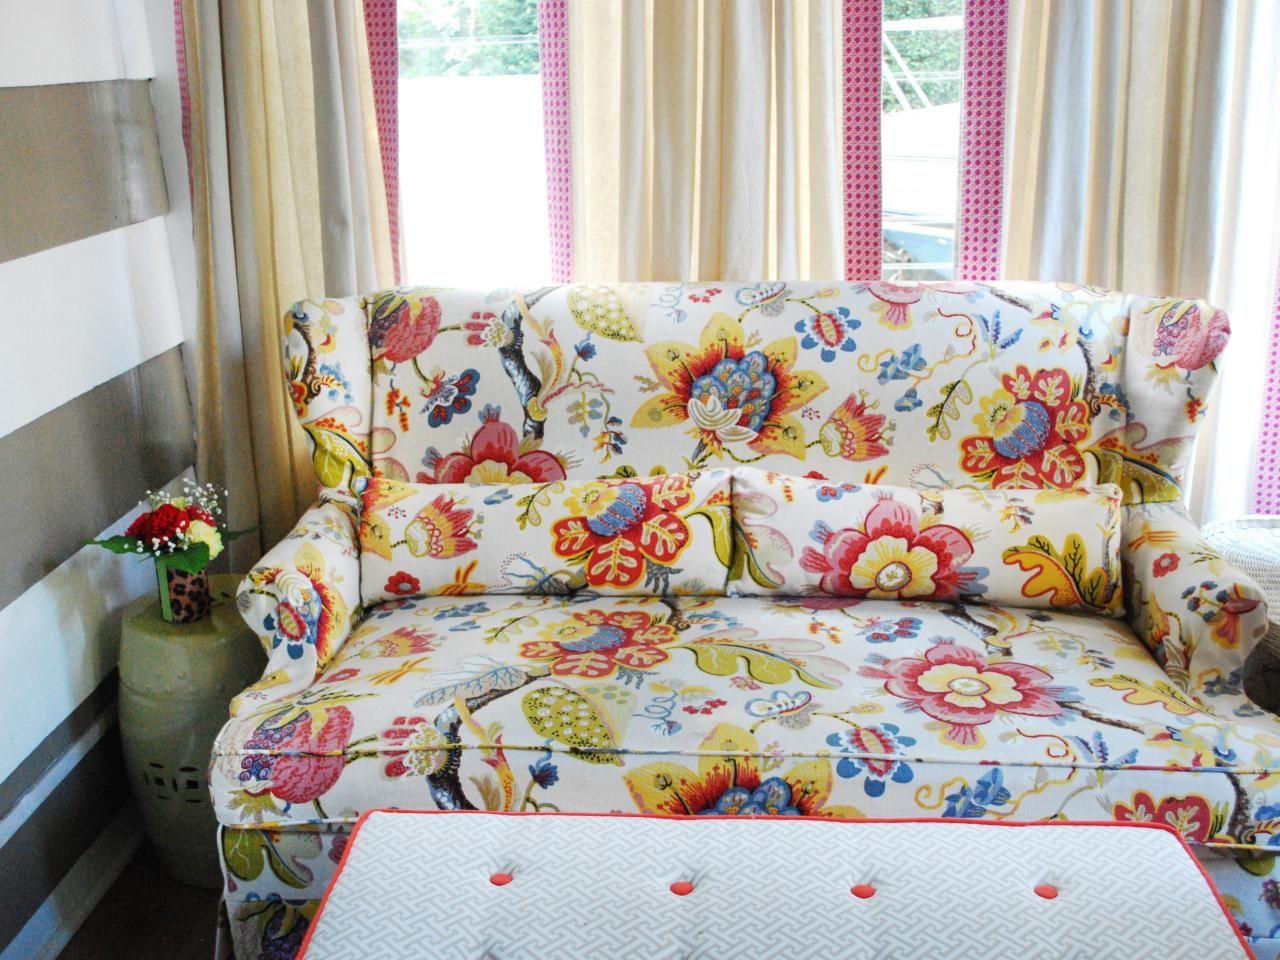 Floral Couch Designs Images Reverse Search With Regard To Chintz Floral Sofas (View 11 of 15)